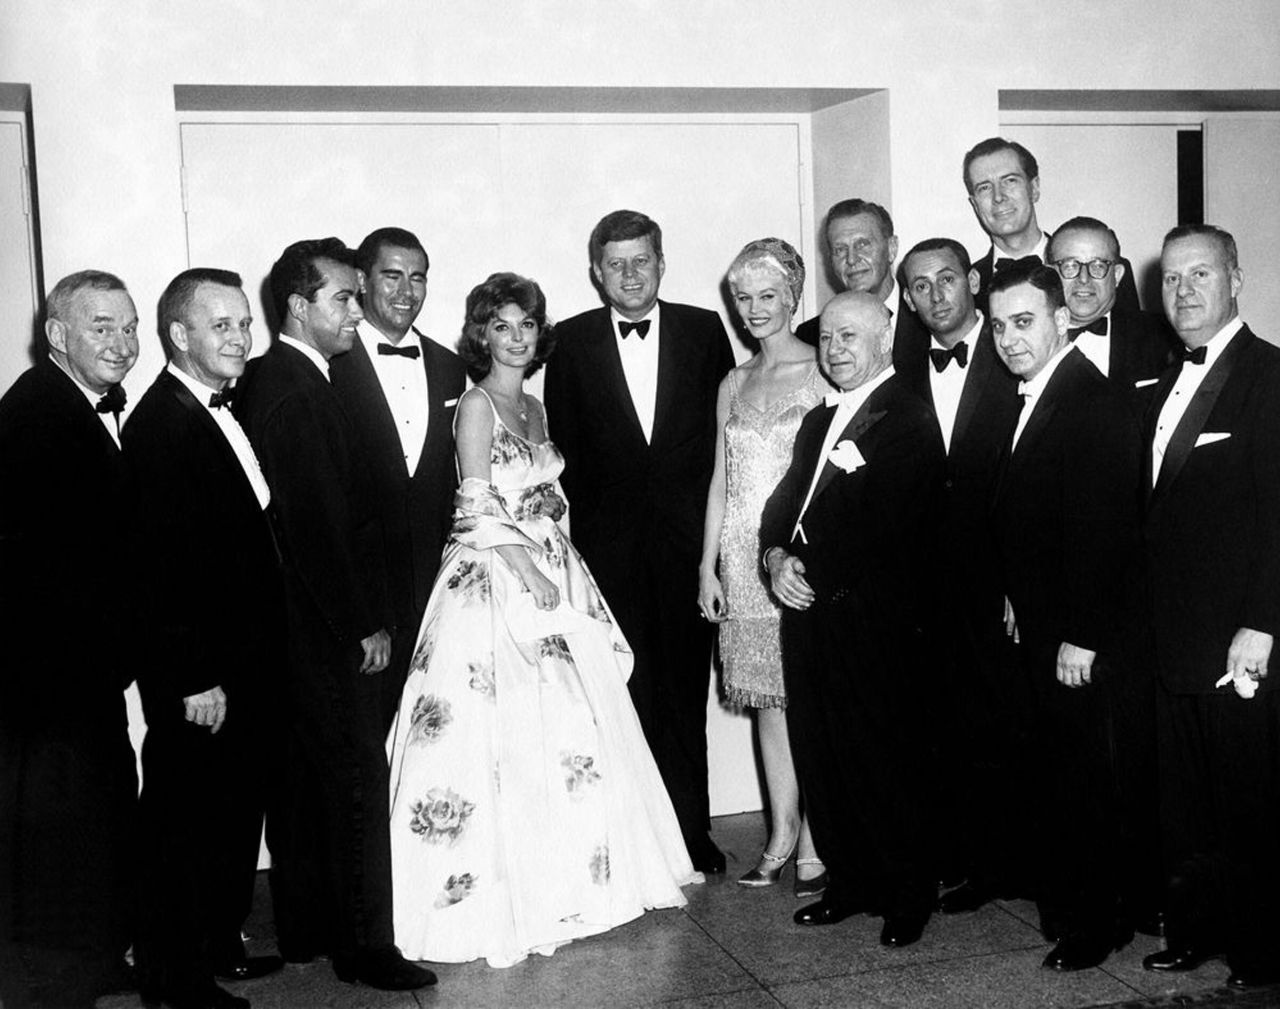 Until 1962, the correspondents' dinner was open to just men. President John F. Kennedy, center, refused to attend until it was opened to women.